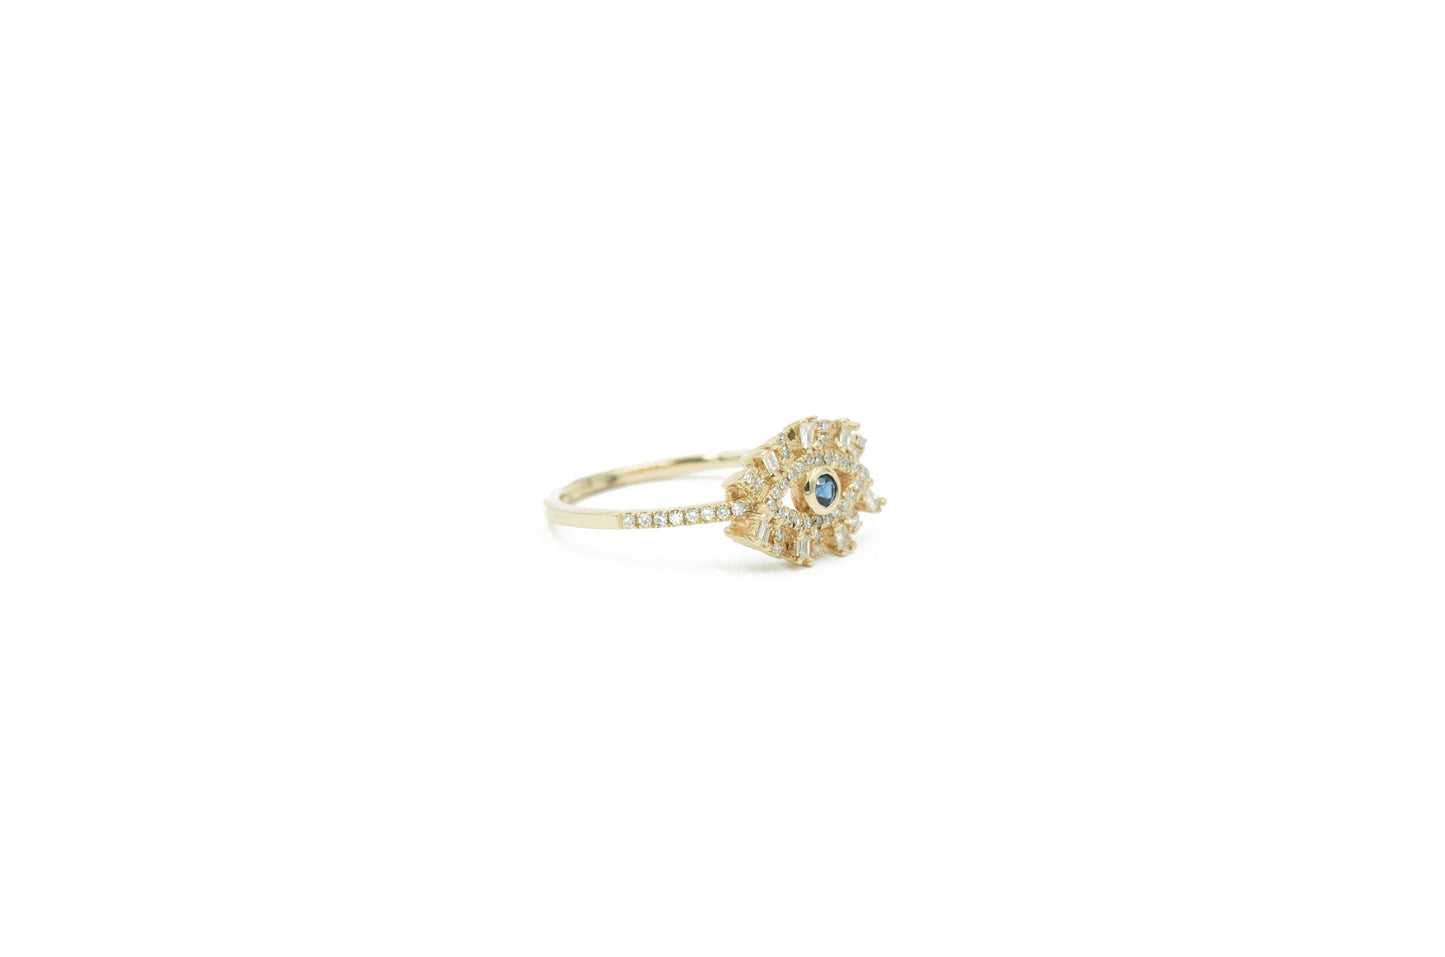 14KT Yellow Gold Diamond Pave, Diamond Baguette and Sapphire Evil Eye Ring